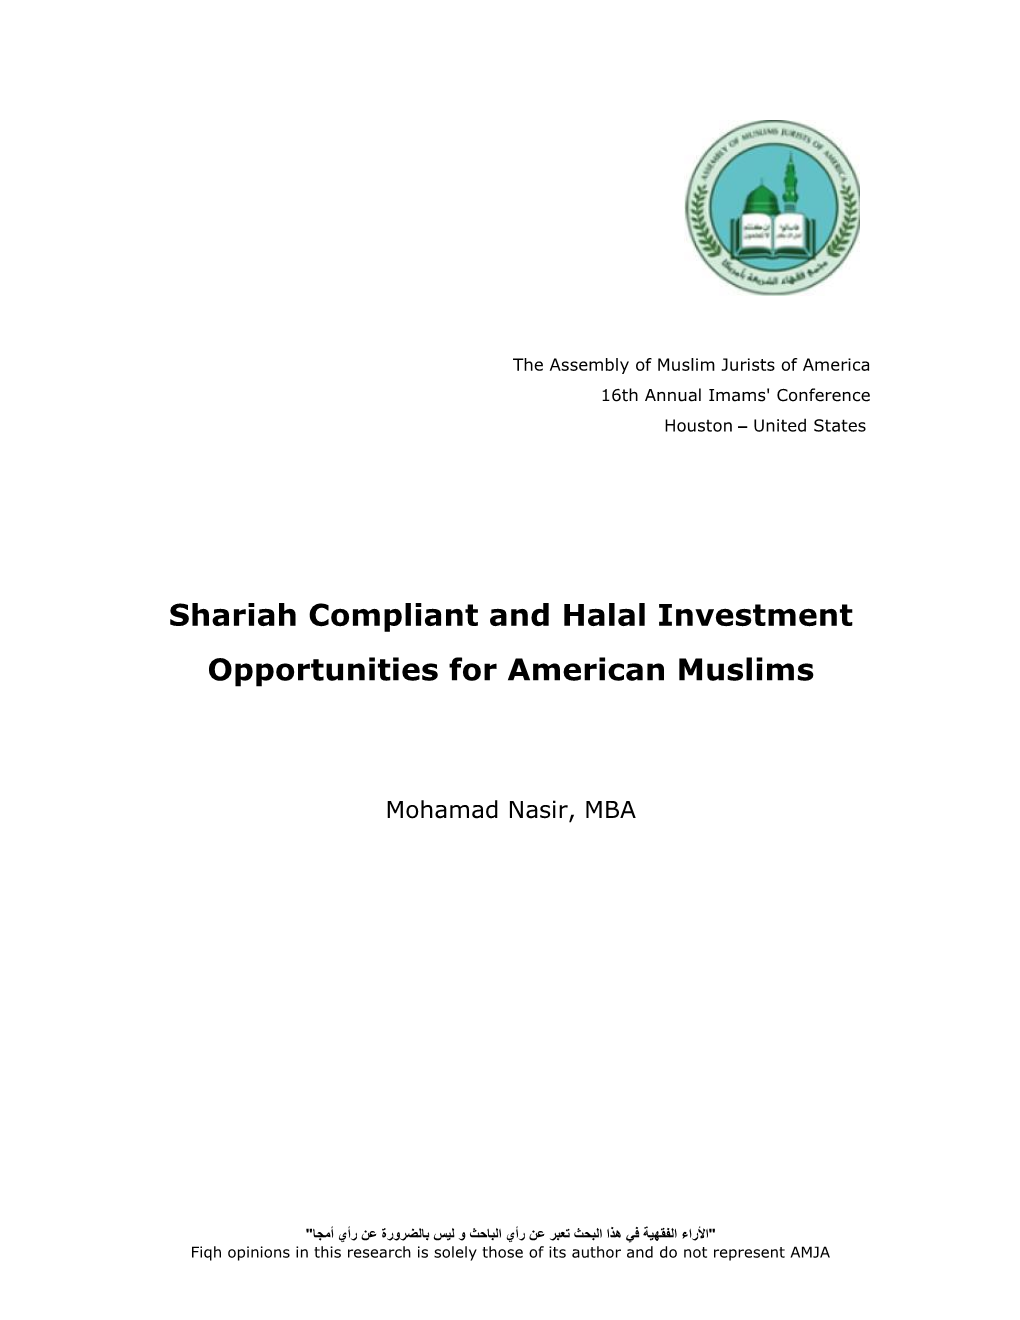 Shariah Compliant and Halal Investment Opportunities for American Muslims